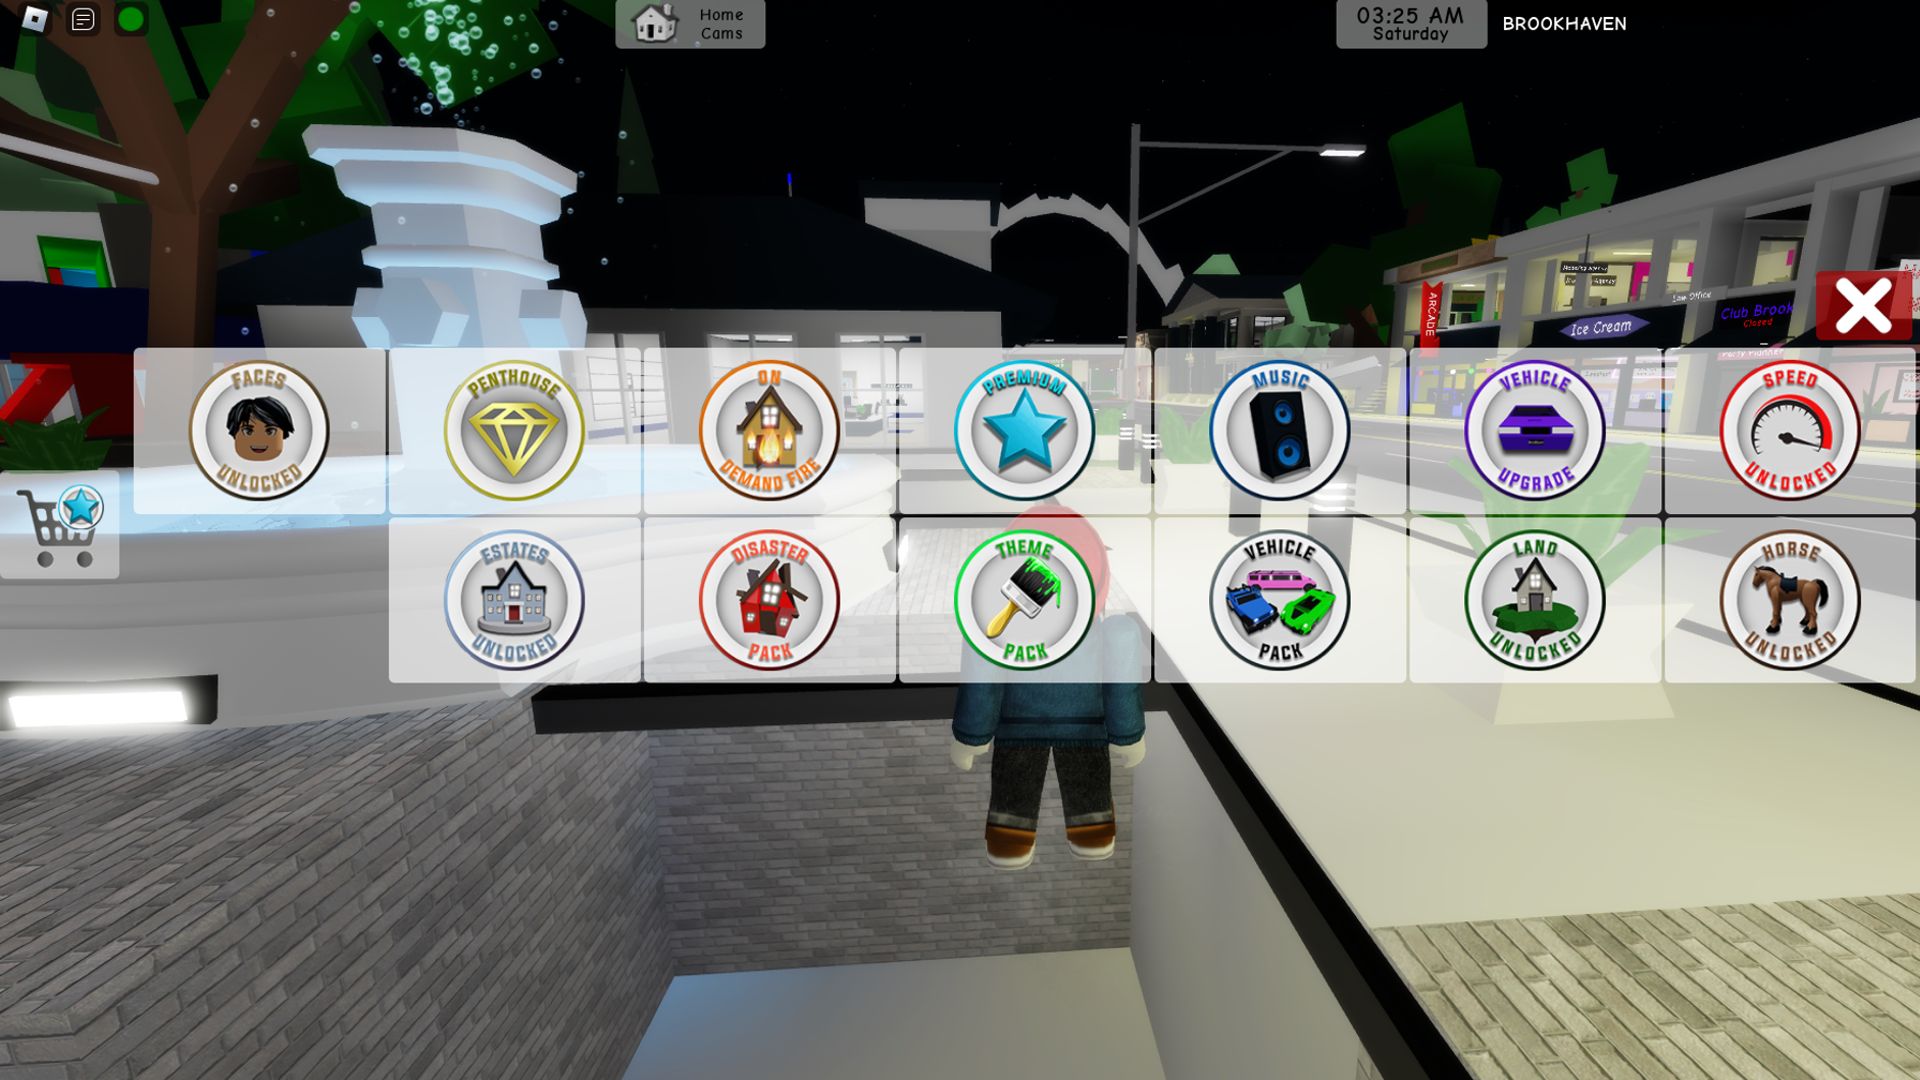 Roblox Brookhaven RP codes for free songs in December 2023 - Charlie INTEL